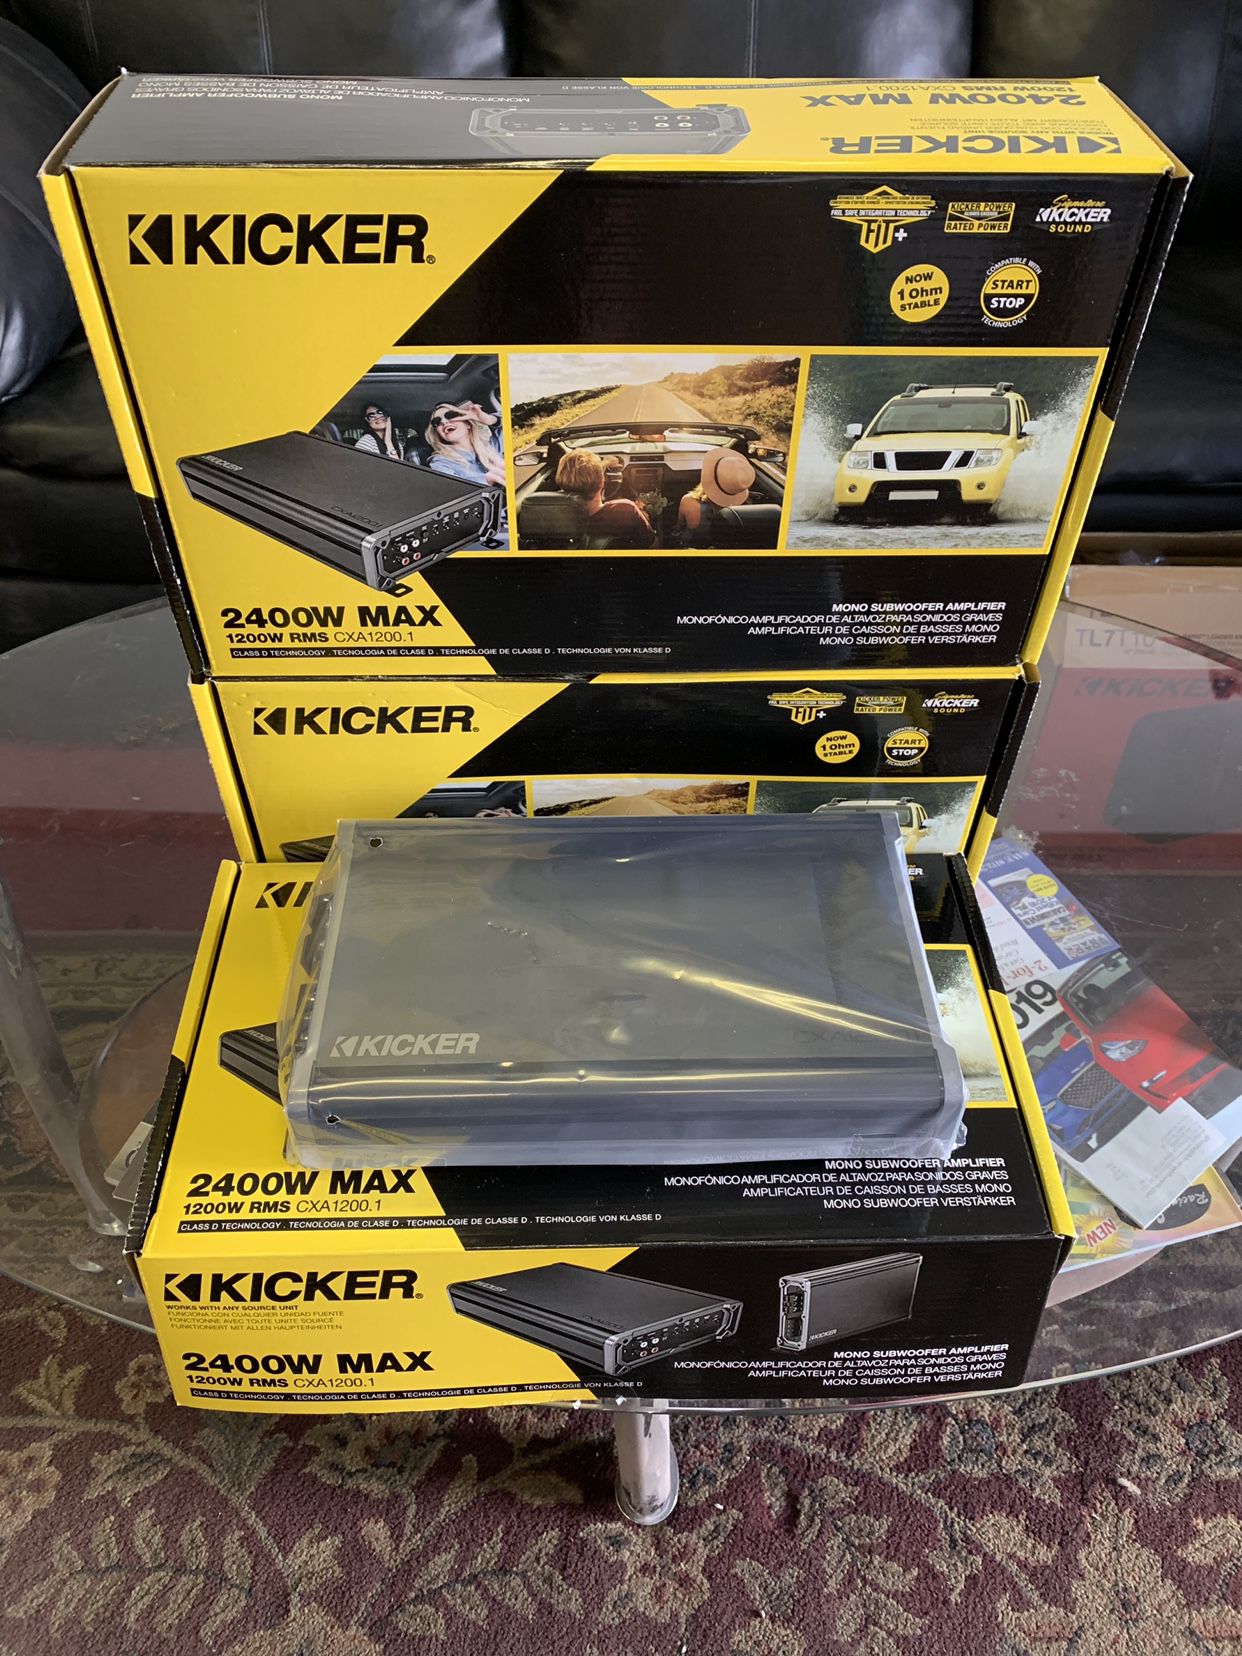 Kicker Car Audio Car Stereo Amplifier . 2400 watts . Holiday Super Sale . $259 While They Last . New